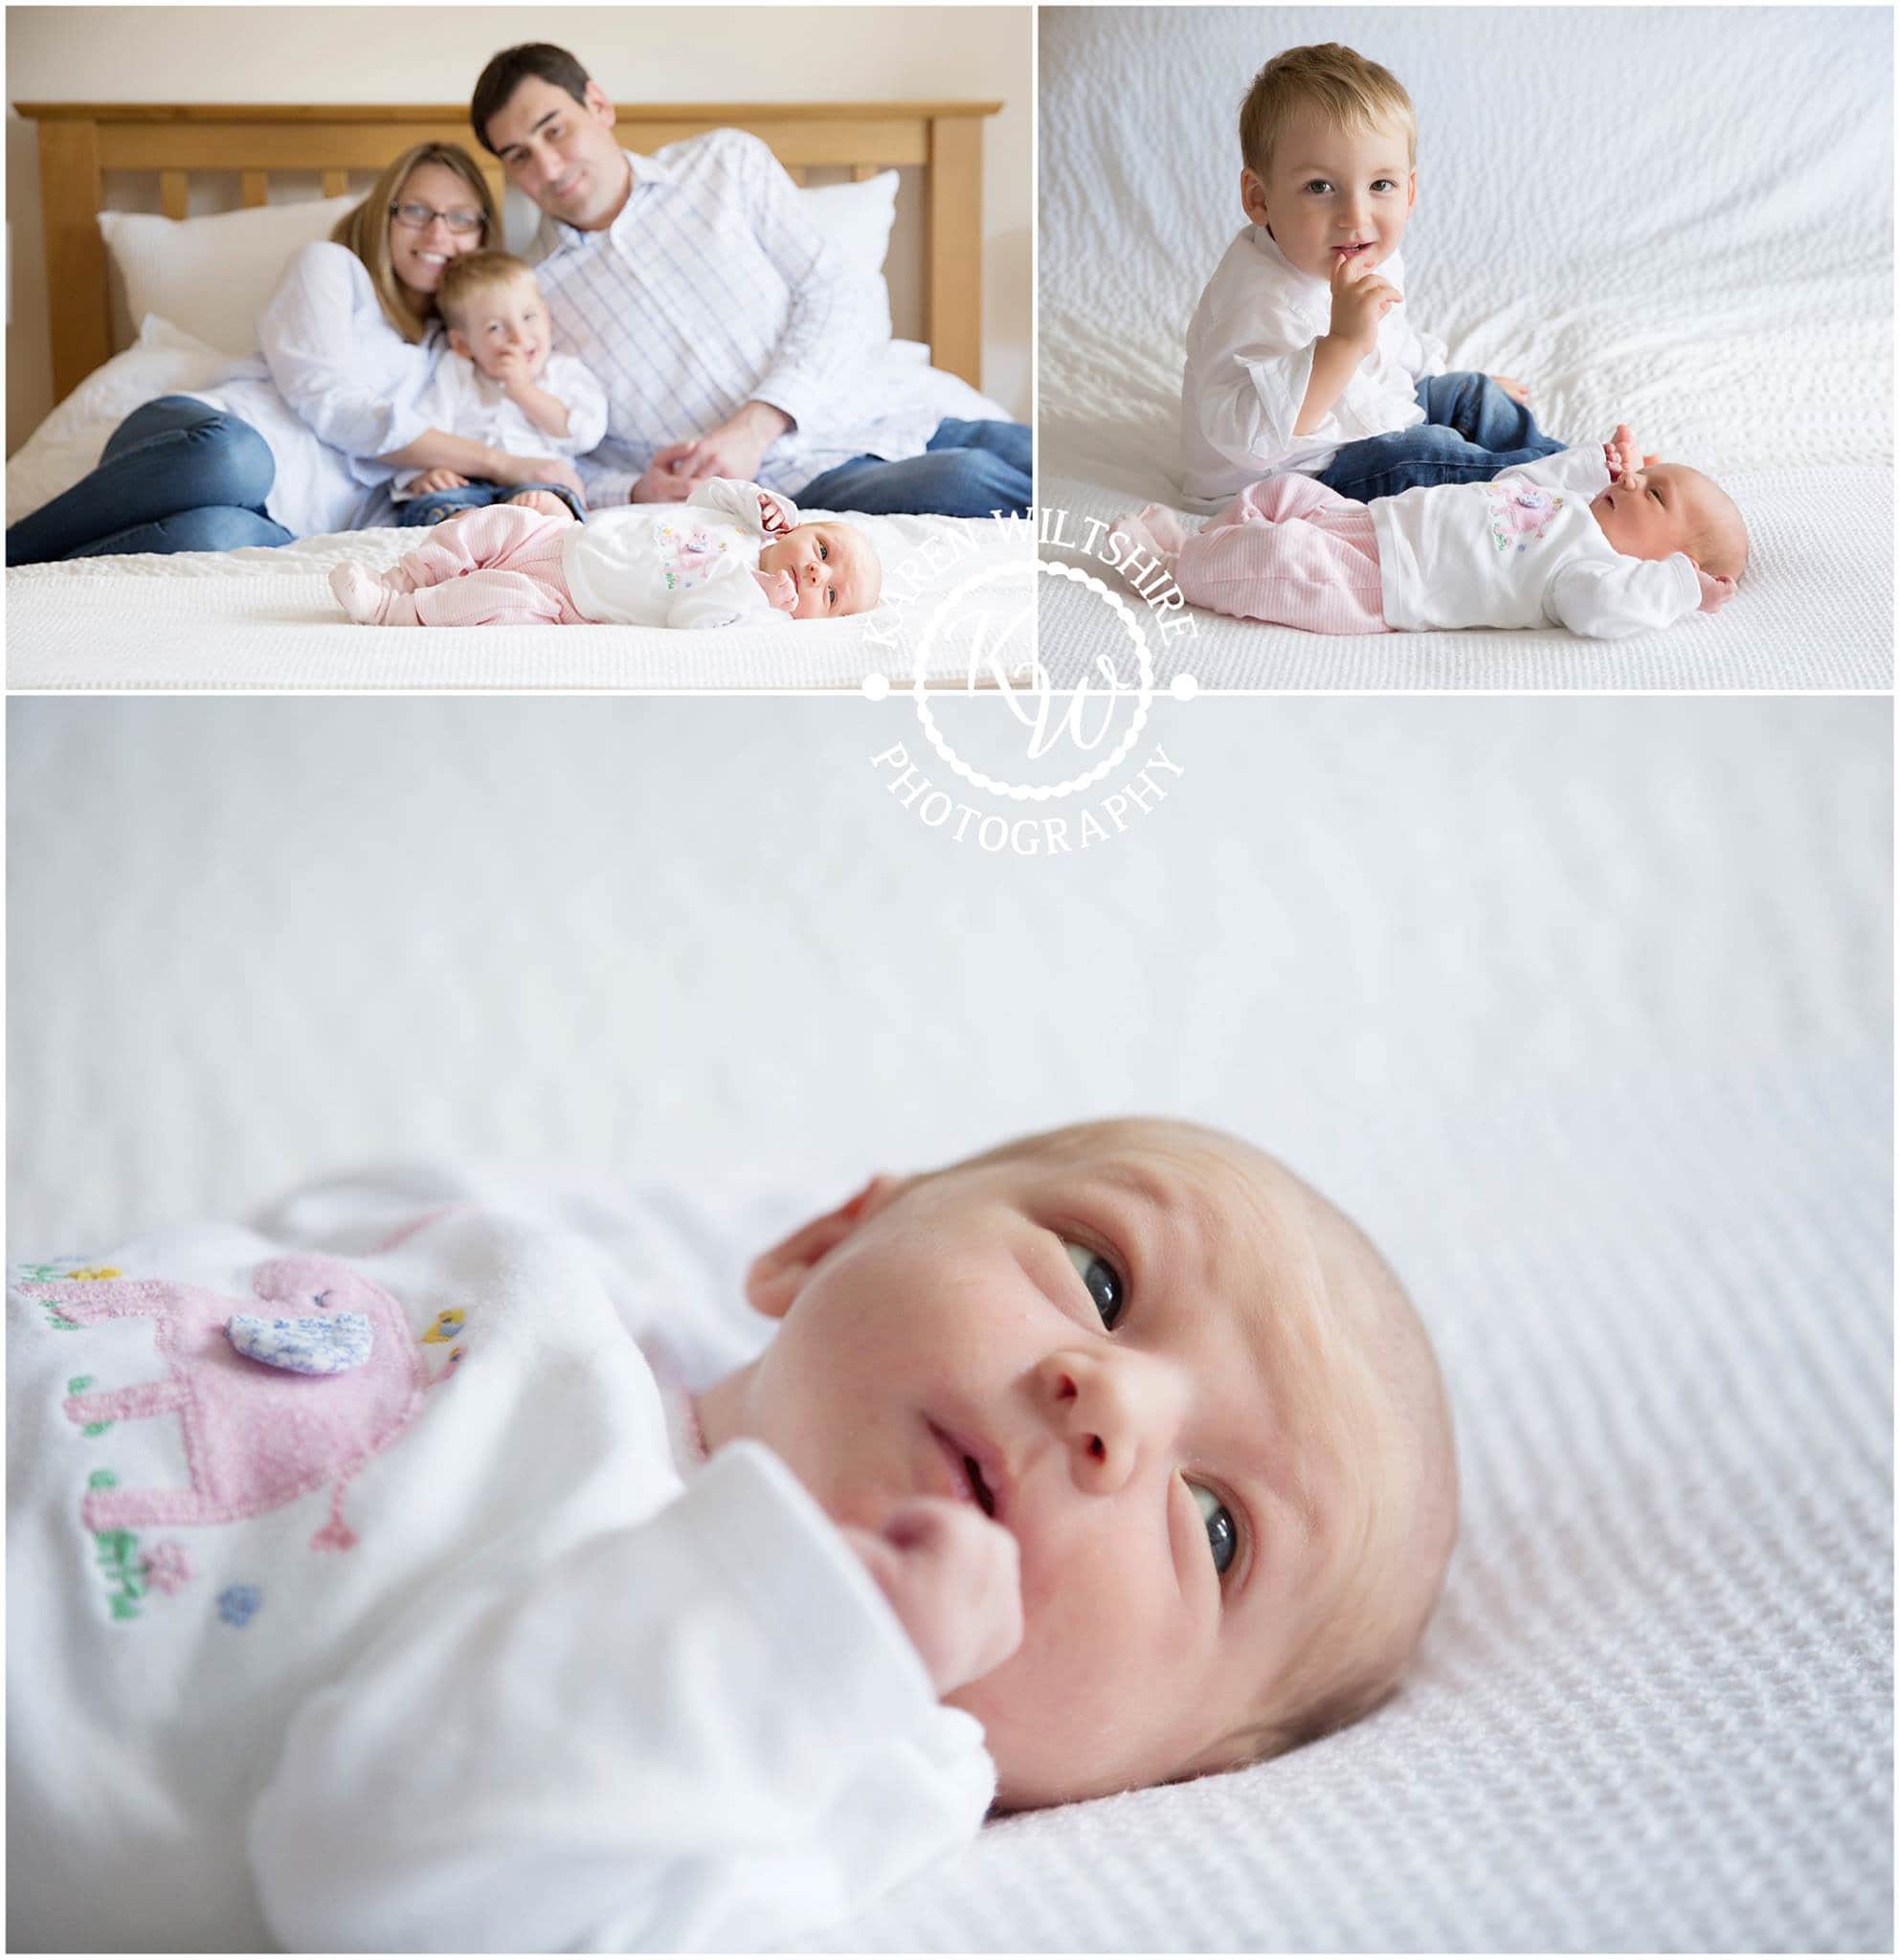 newborn photography with a difference